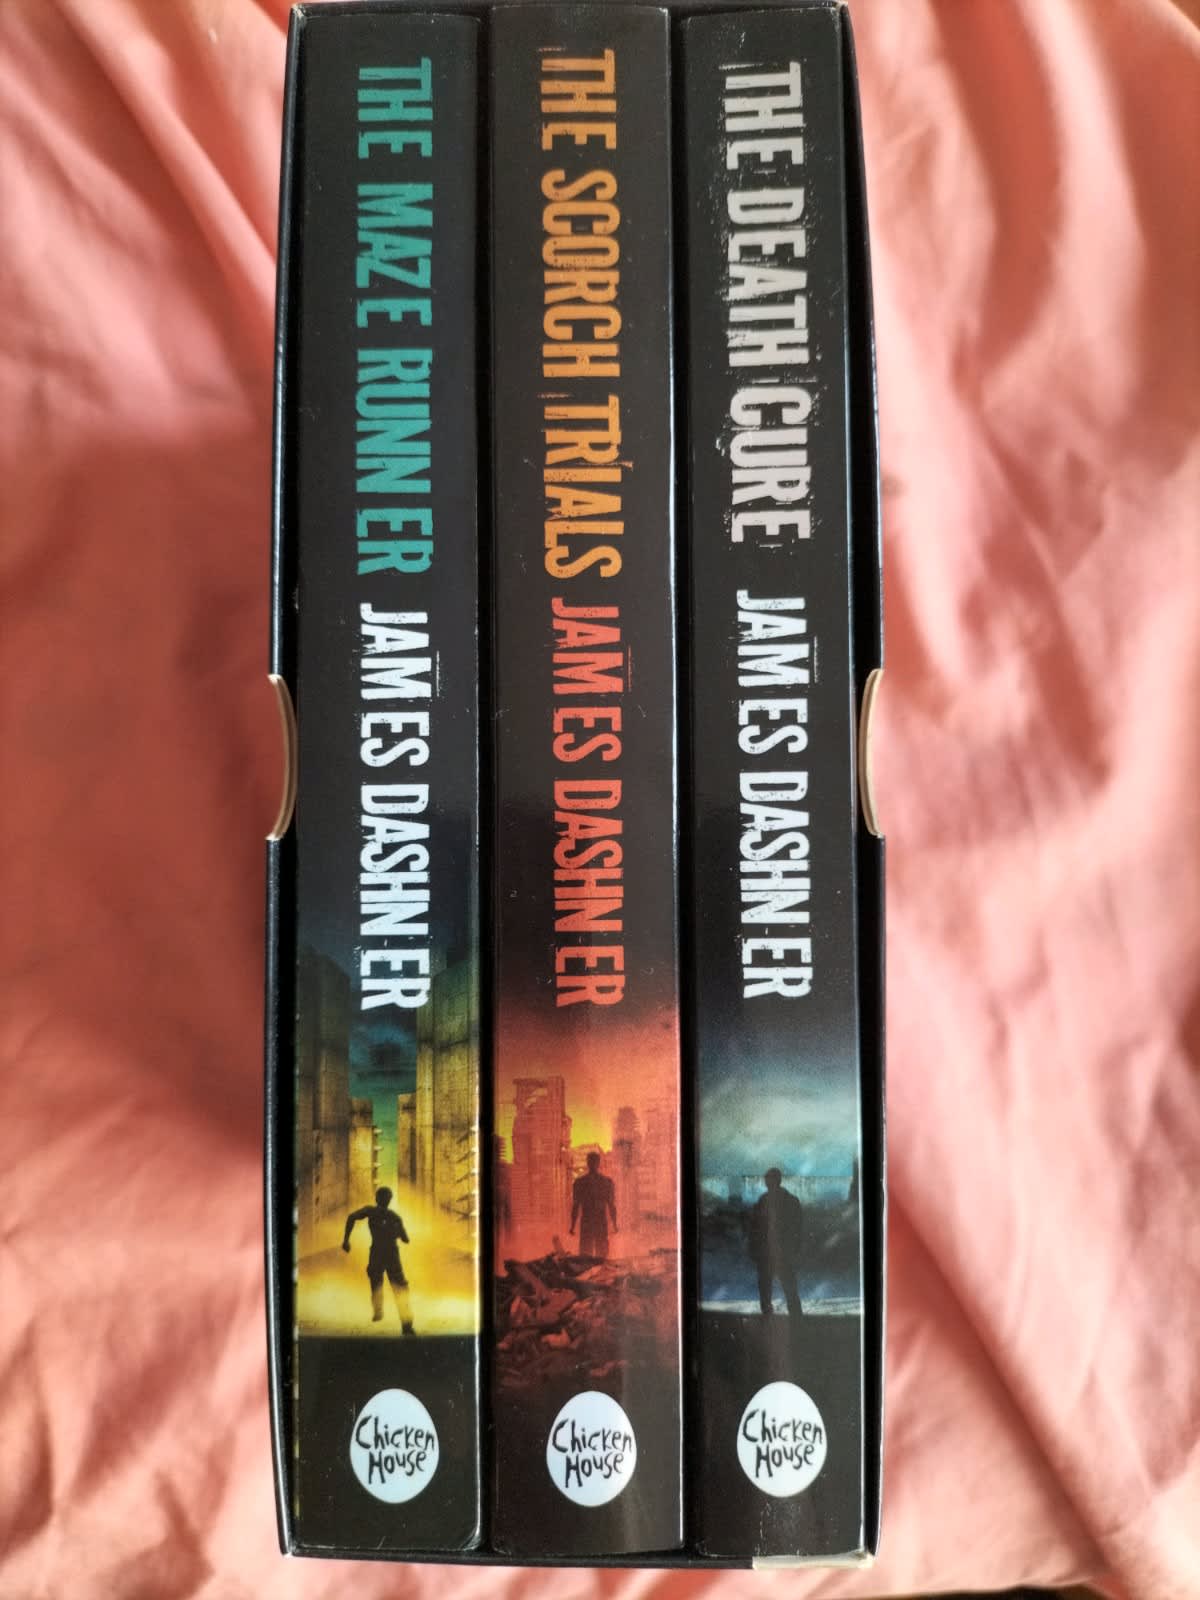 Chicken House Books - Death Cure